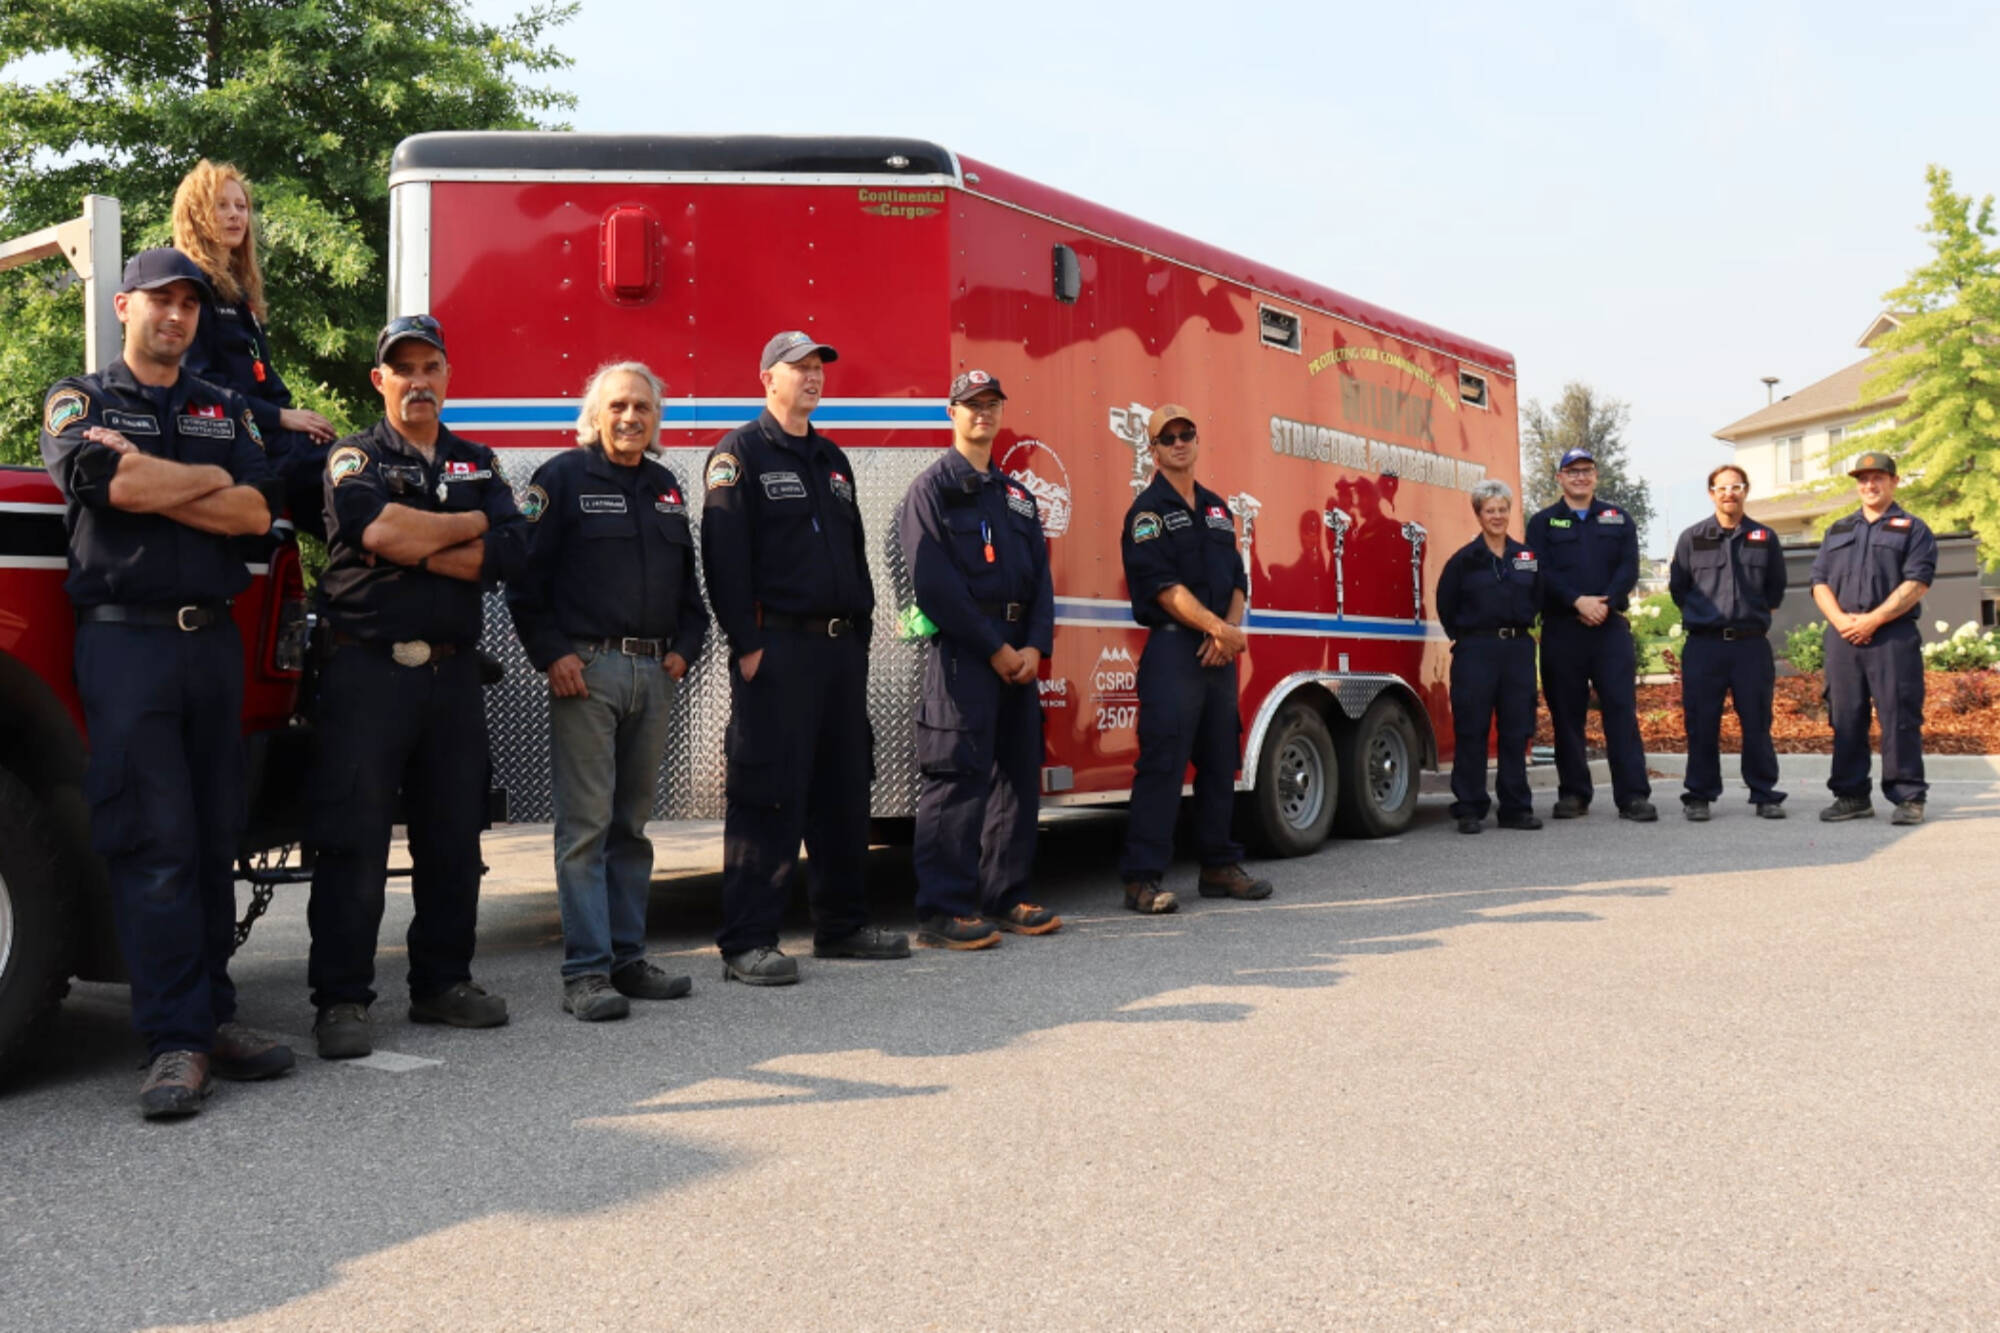 Two Columbia Shuswap Regional District fire crews stand next to a structure protection unit for a photograph before being deployed to fight wildfires in July 2021. (CSRD photo)